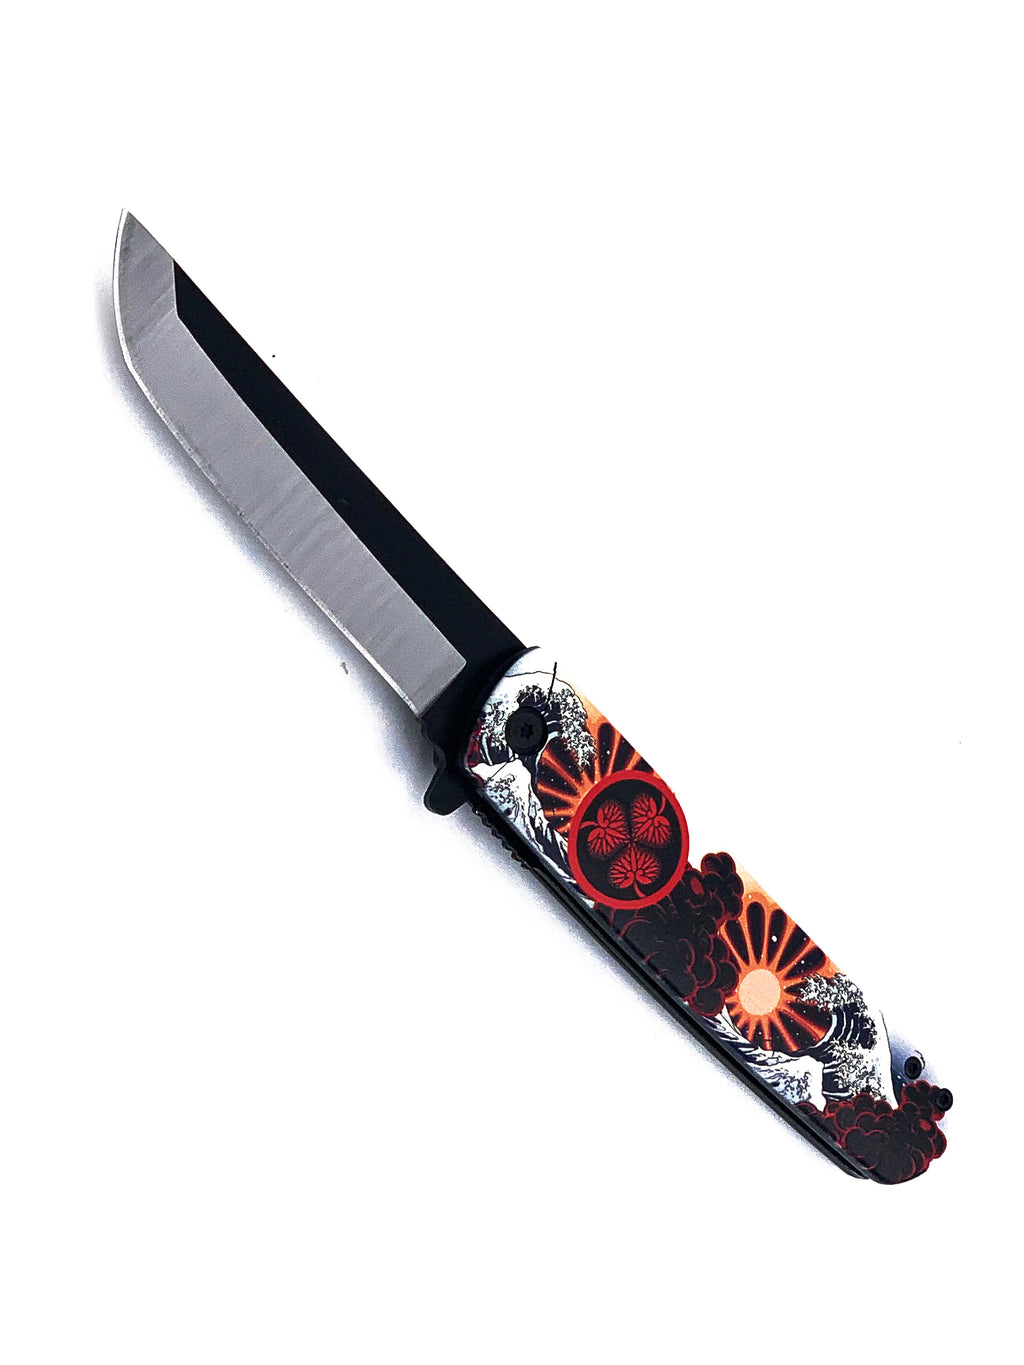 Ocean Sunrise Samurai Spring Assisted Pocket Knife with Two Tone Rounded Tanto Blade